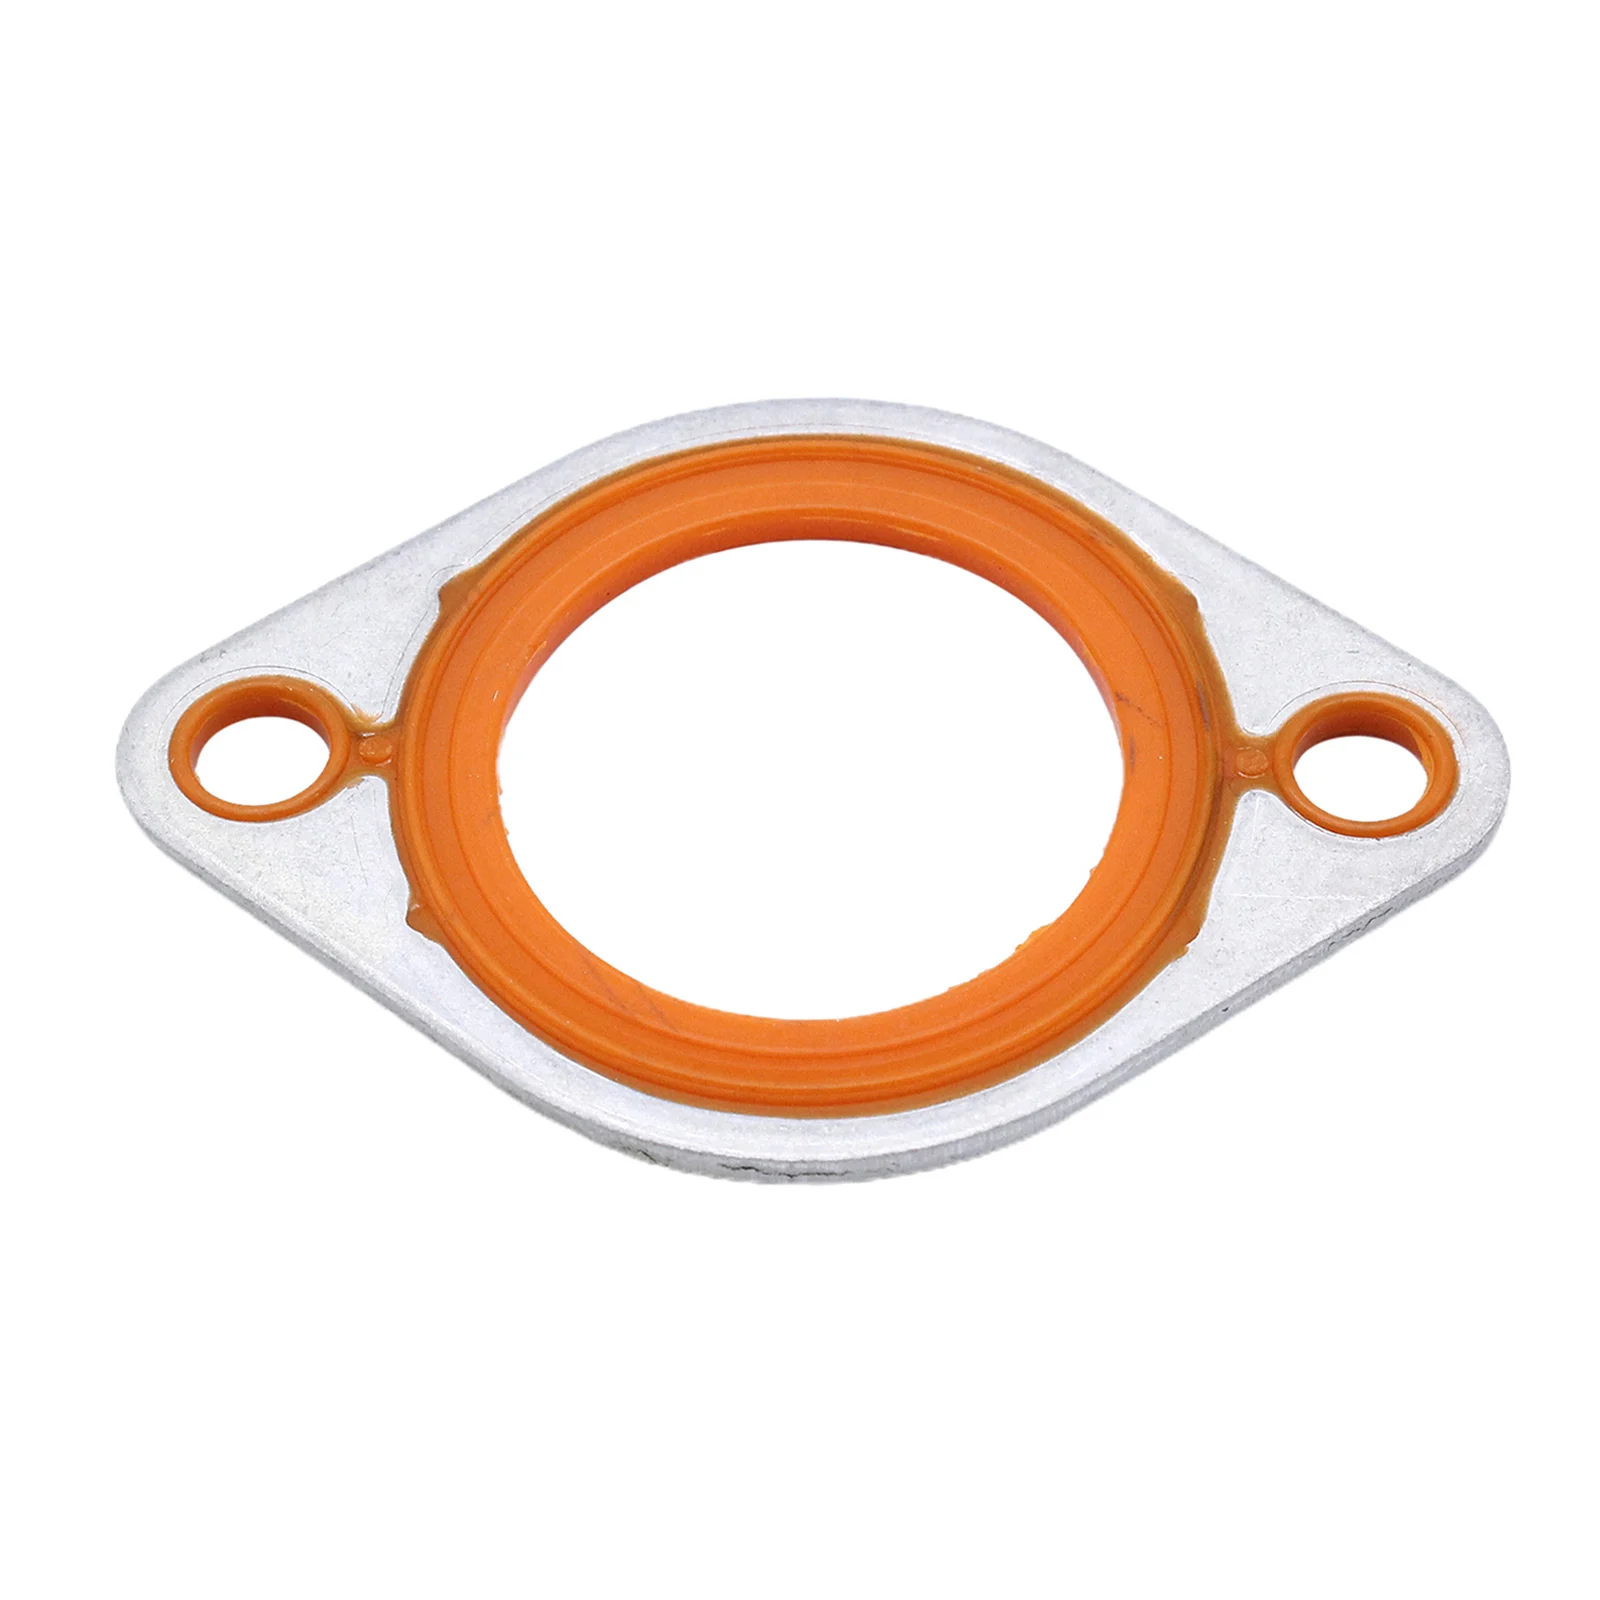 Thermostat Housing Gasket Fit for Chevy BBC 283 327 427 454 502 Aluminum/Silicone Parts Acc